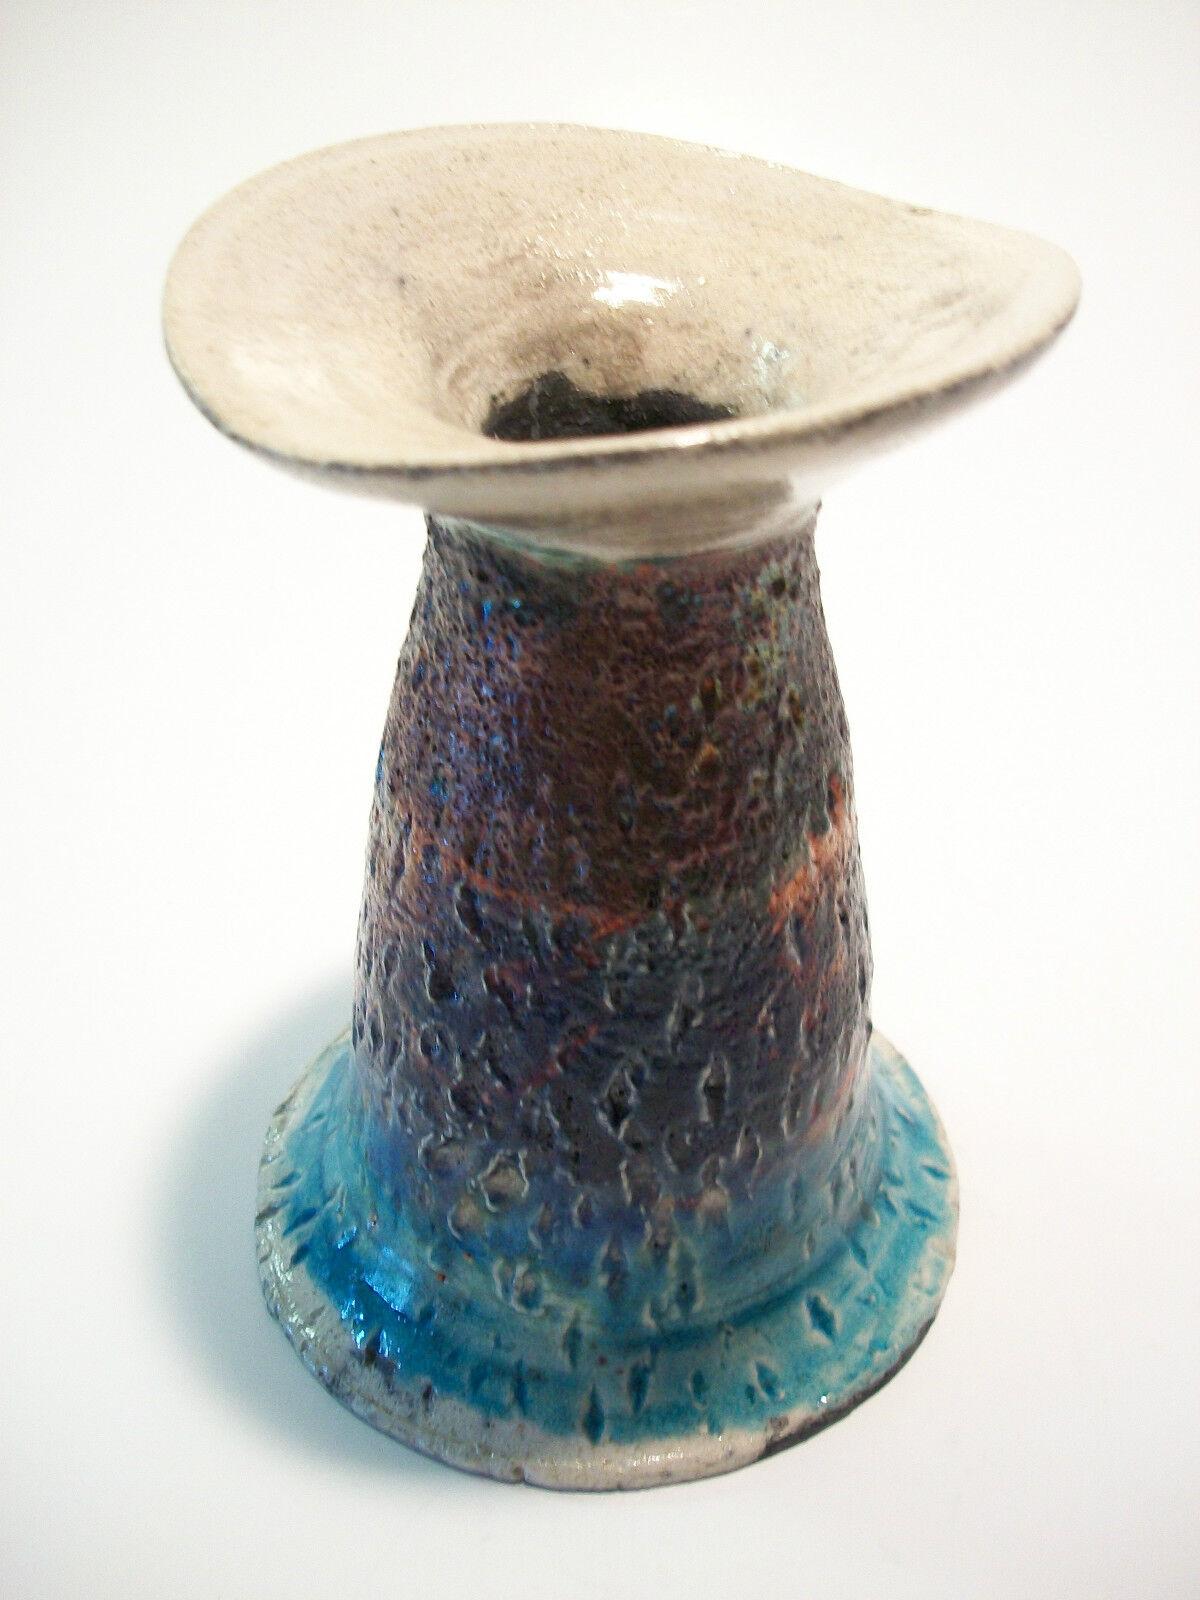 Vintage hand made and incise decorated Raku studio pottery vase with graduated iridescent glaze - signed/initialed on the base 'HK' - circa 1970's.

Excellent vintage condition - no loss - no damage - no restoration.

Size - 4